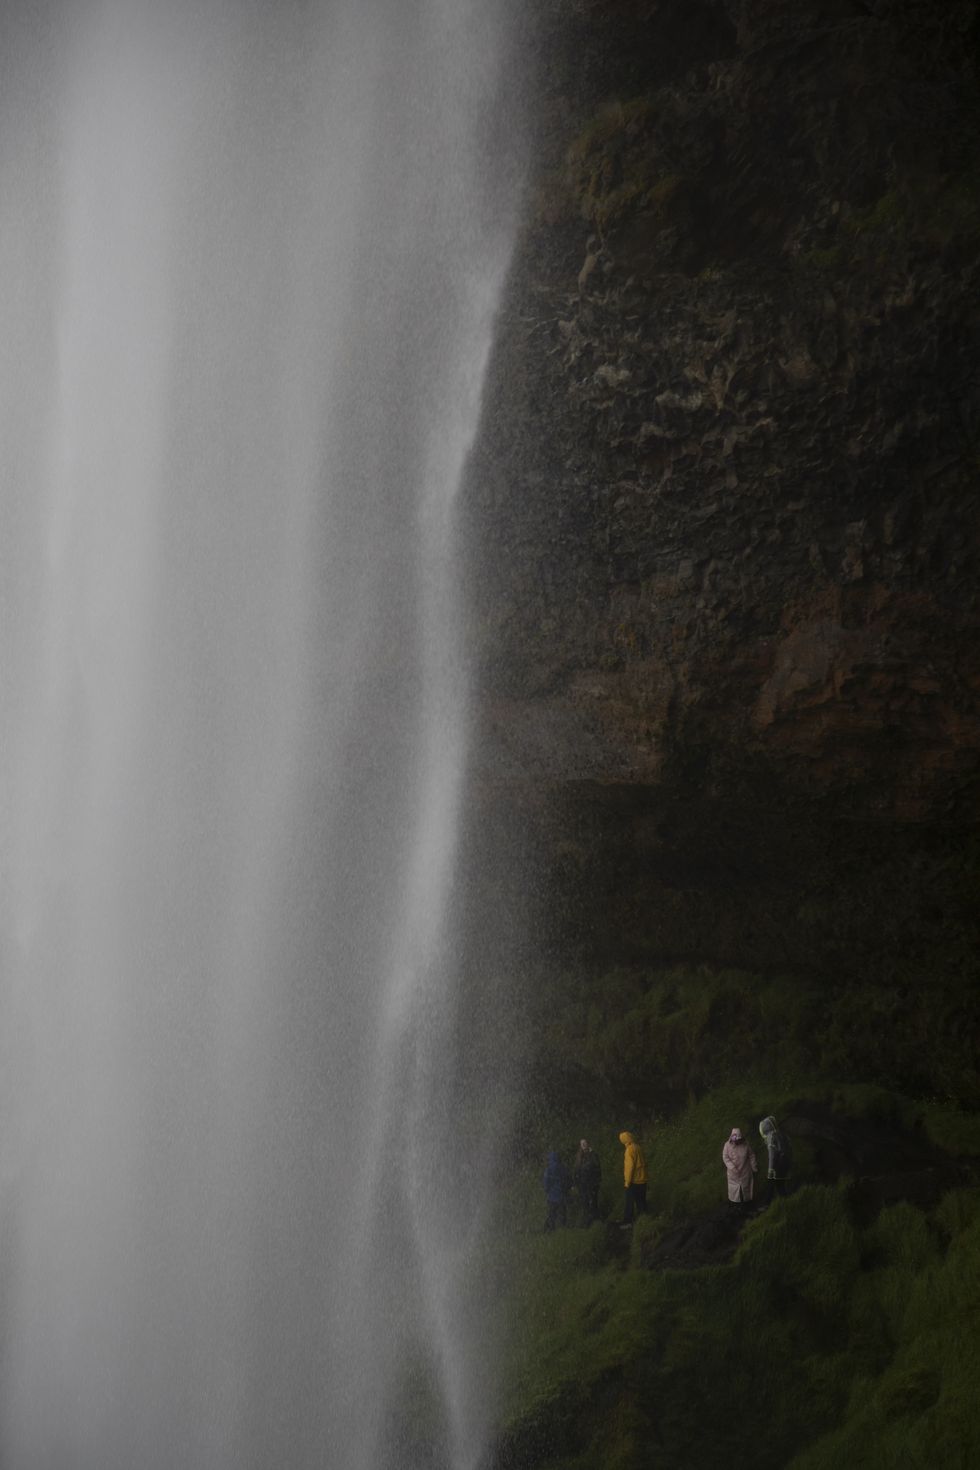 a group of people standing next to a waterfall